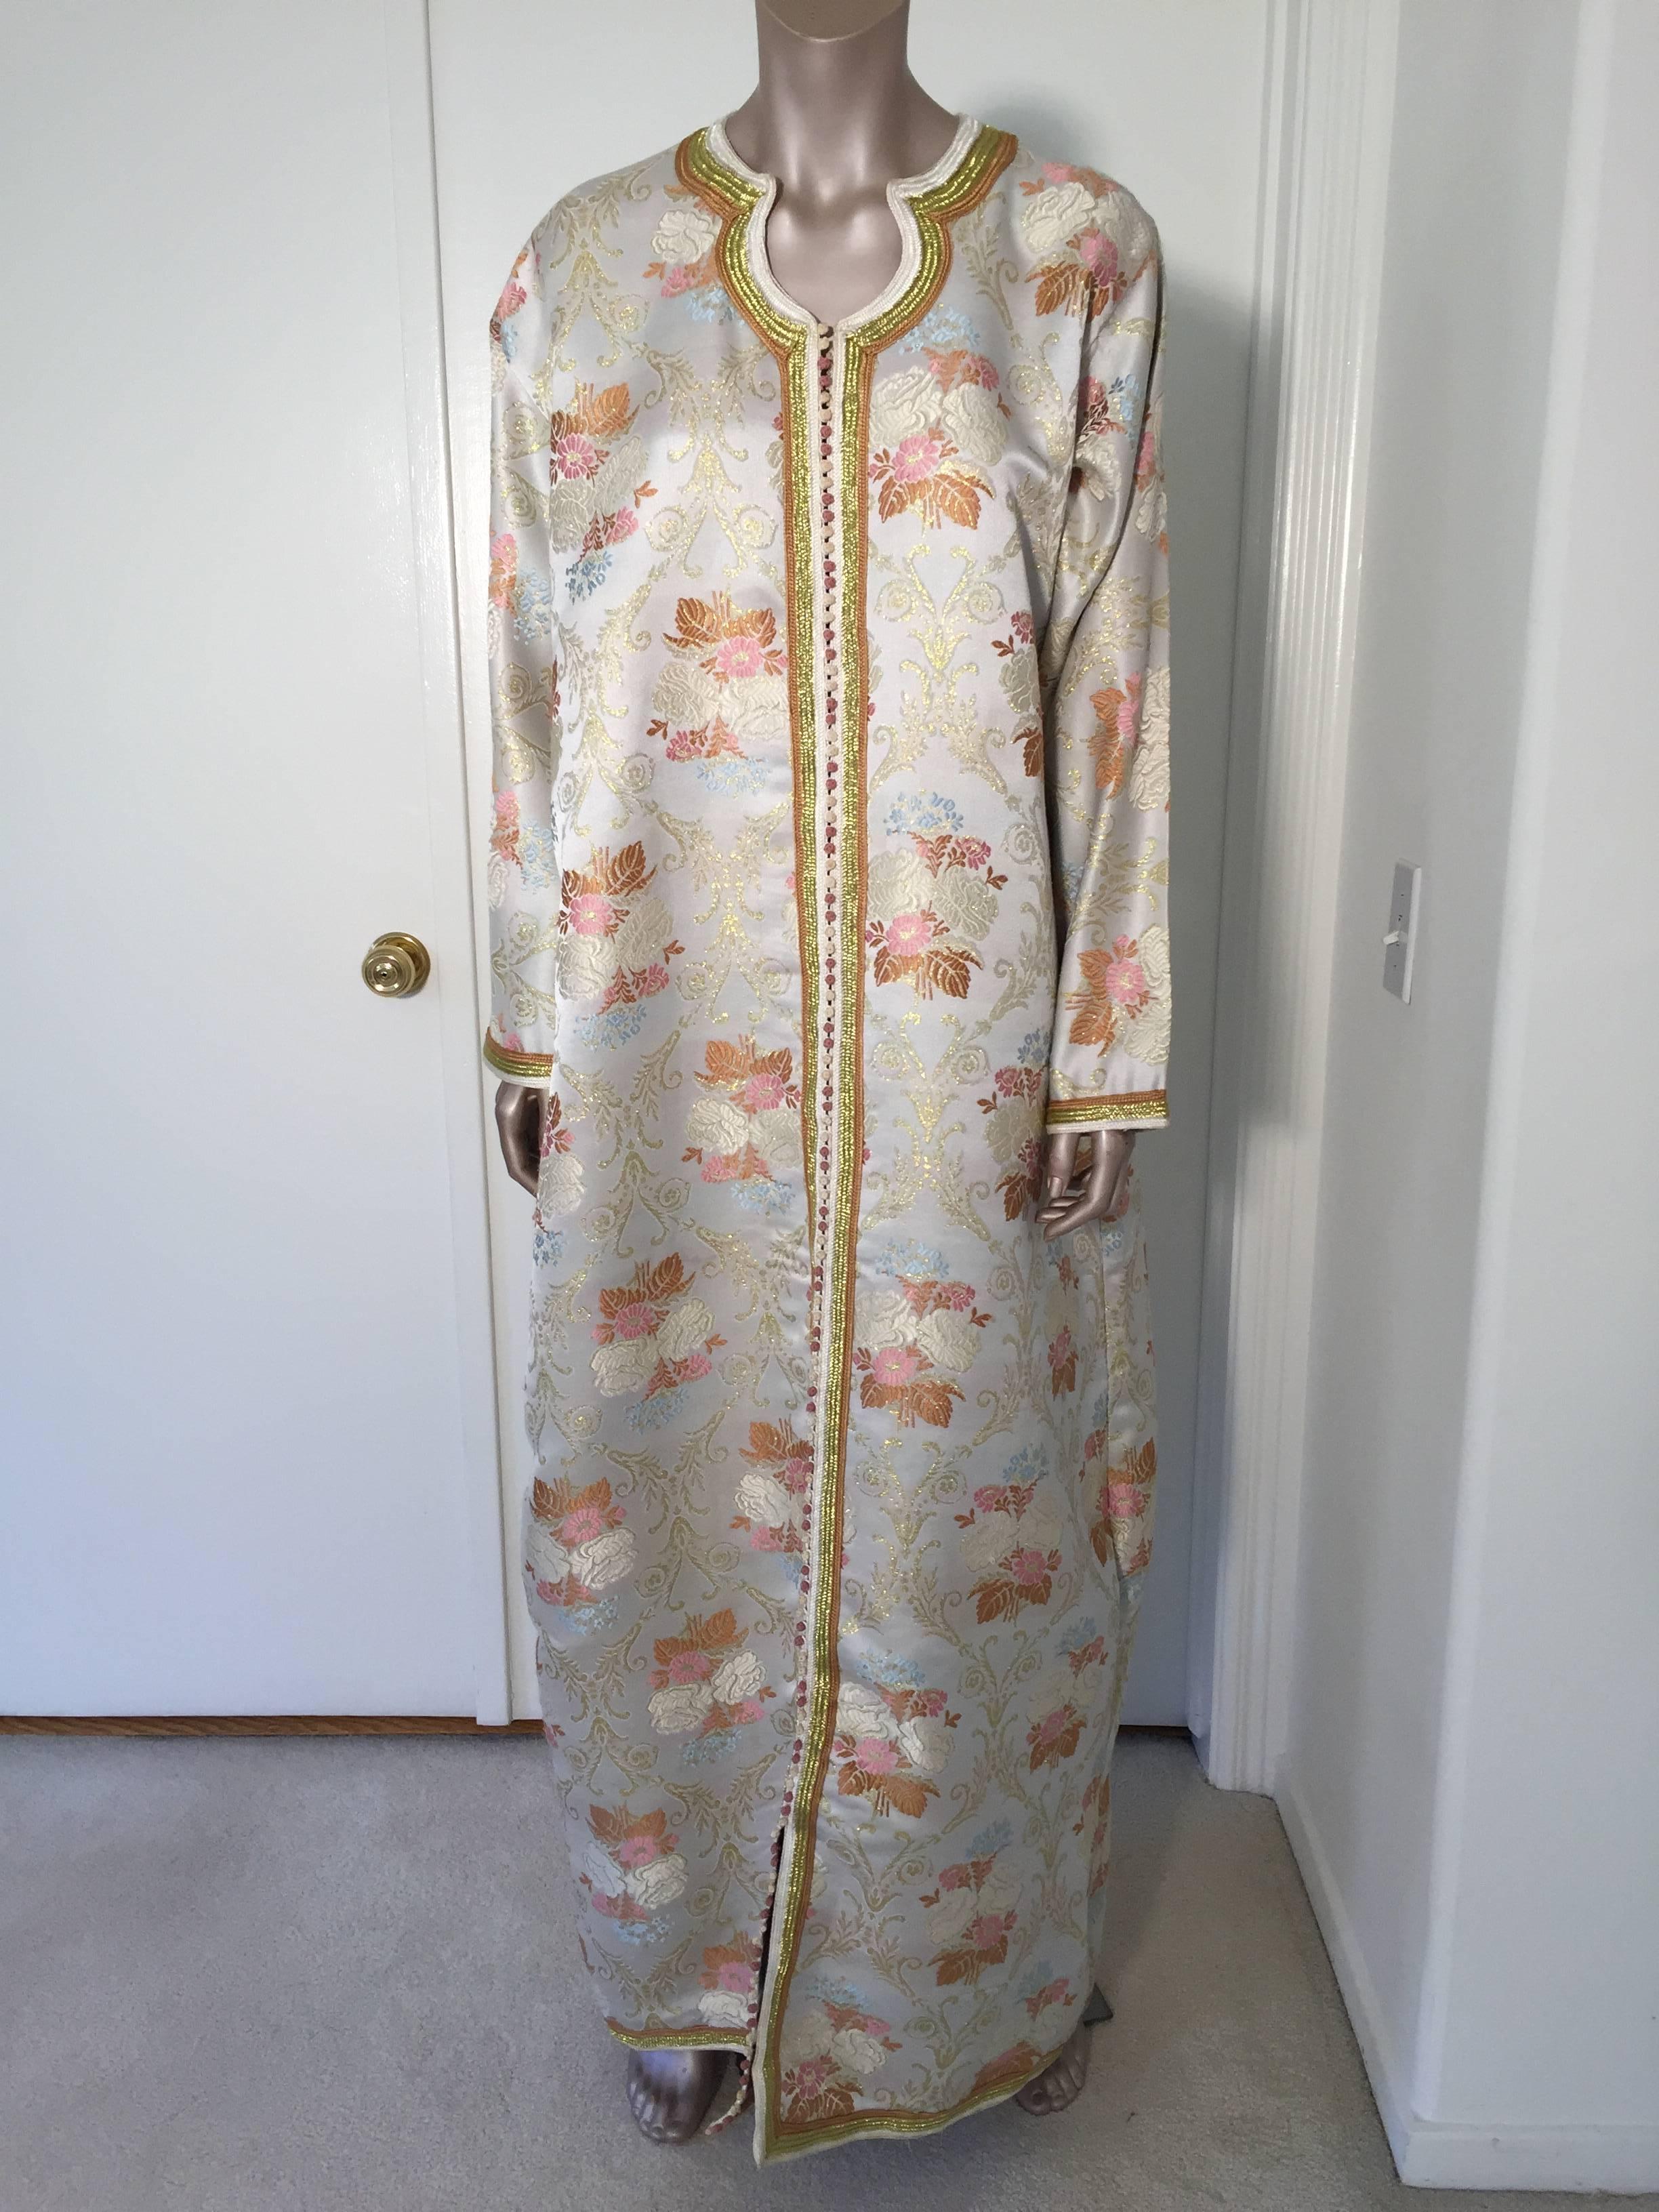 Elegant Moroccan caftan brocade metallic embroidered with gold threads,
circa 1980s.
This kaftan is embroidered and embellished entirely by hand.
One of a kind evening Moroccan Middle Eastern gown.
The kaftan features a traditional neckline and